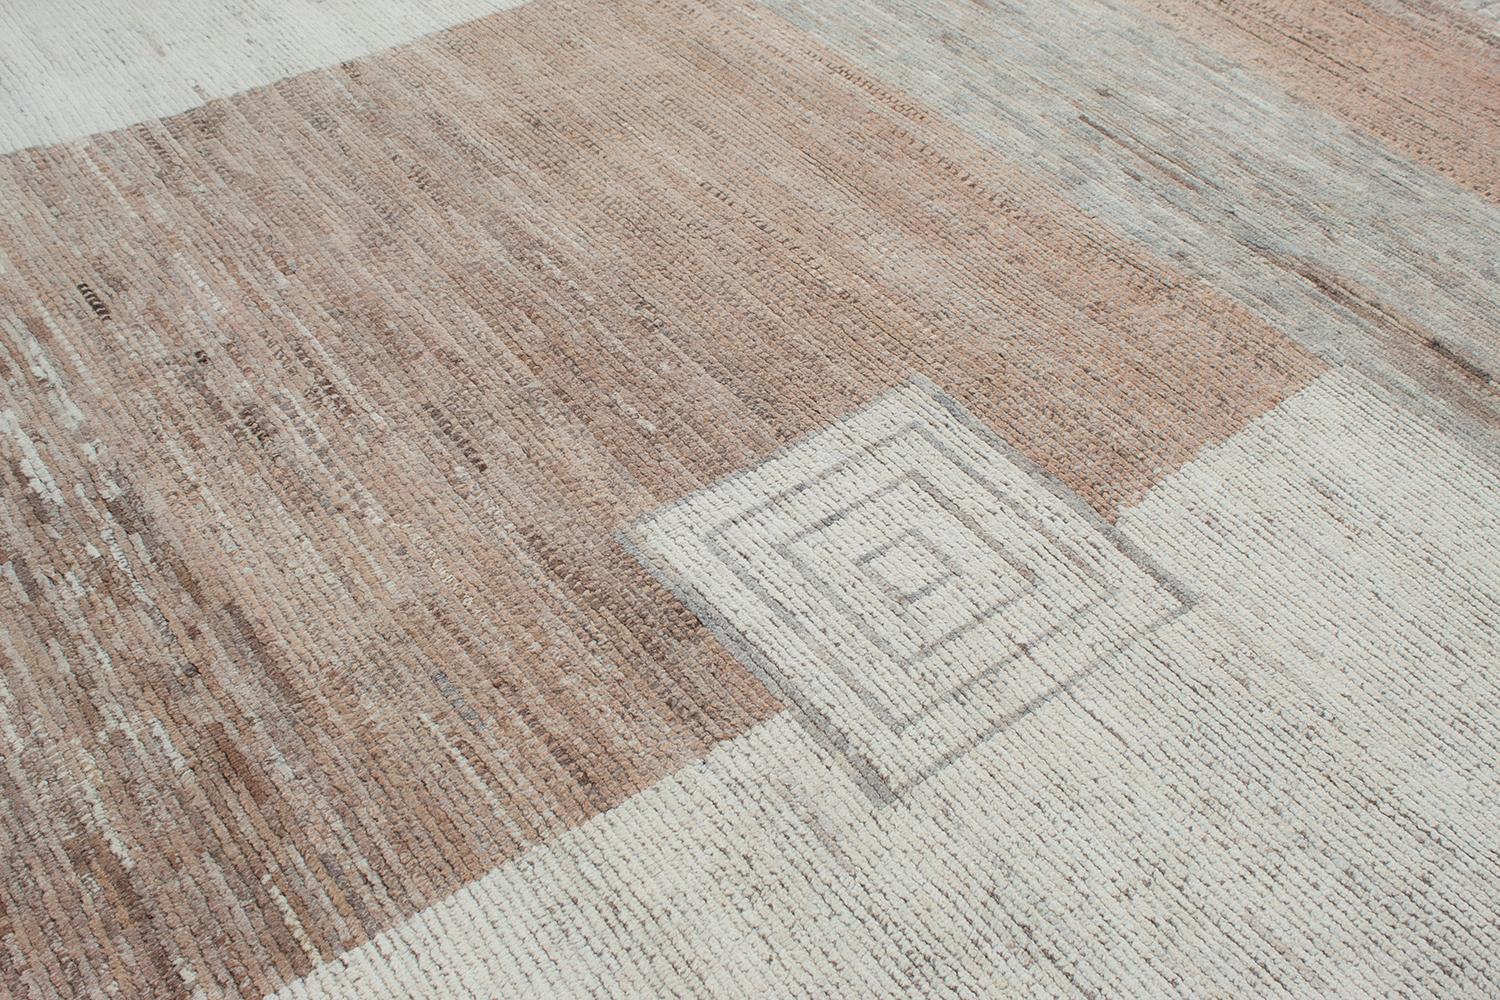 This is a beautiful modern rug that consists of 100% handspun and handcarded wool making it extremely durable. It has a very minimal design featuring geometric elements making it suitable for an array of settings. There are beige, tan, copper, and